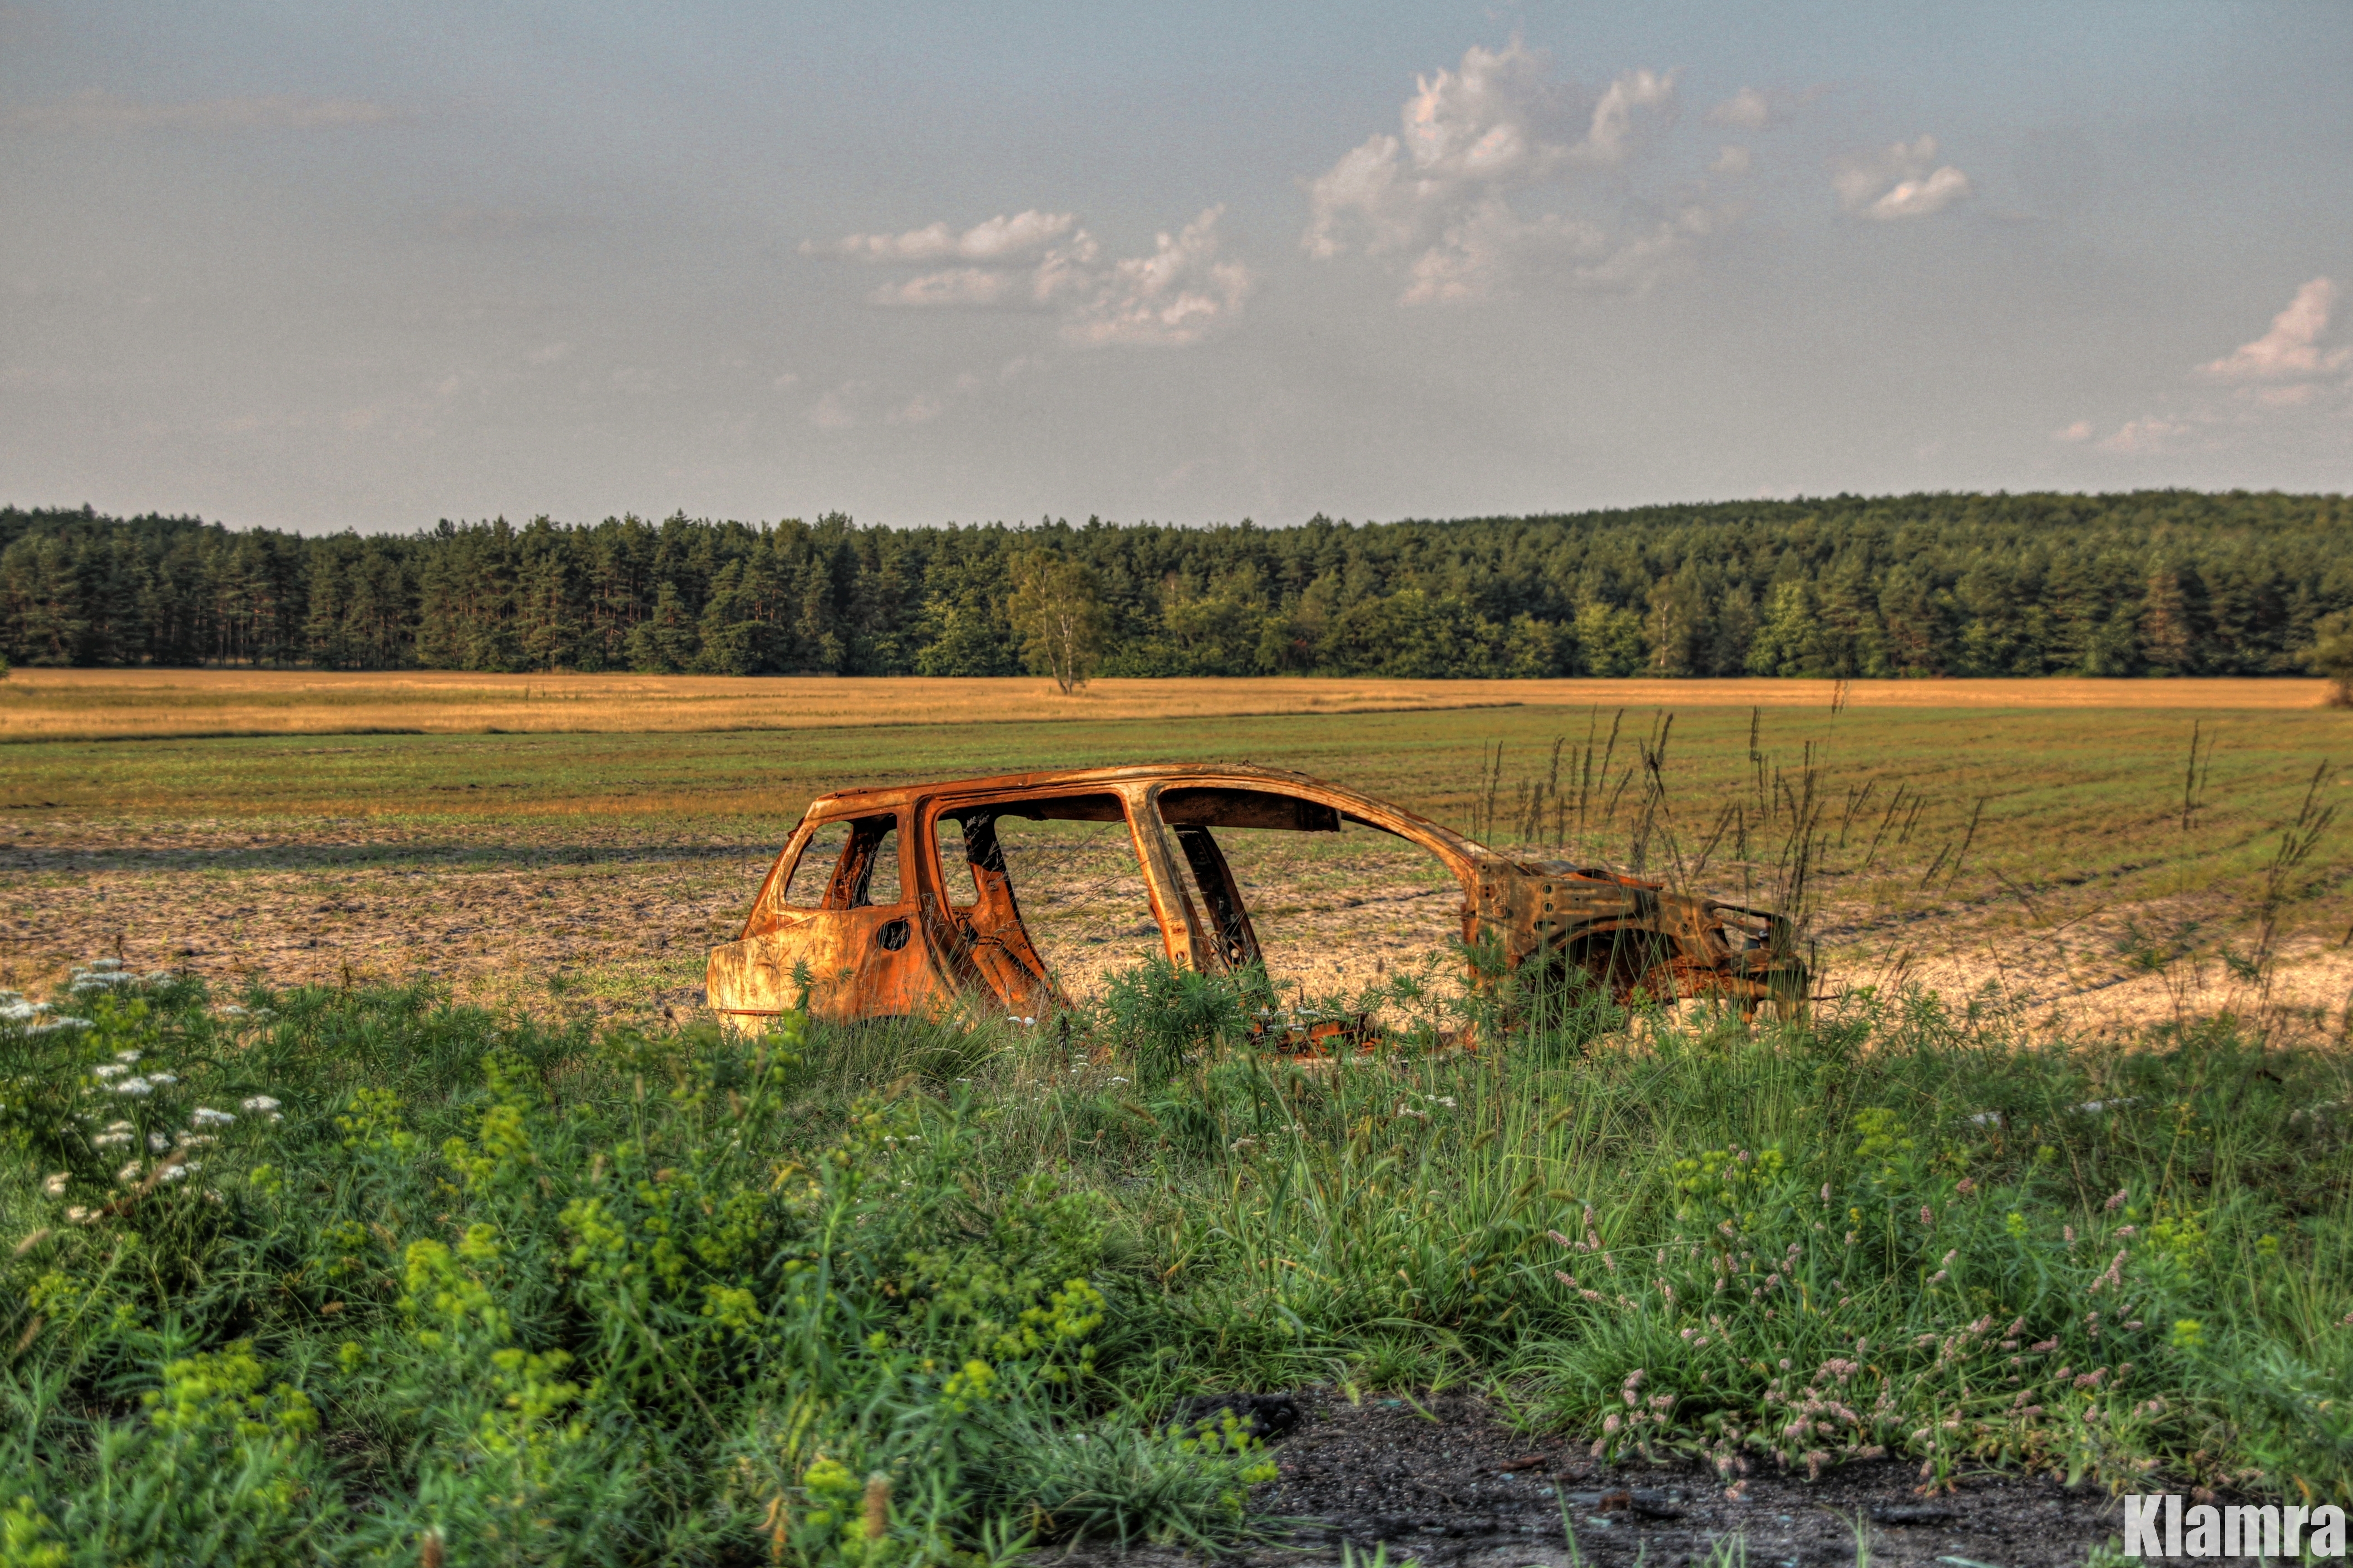 General 5183x3454 Poland car abandoned wreck vehicle outdoors field